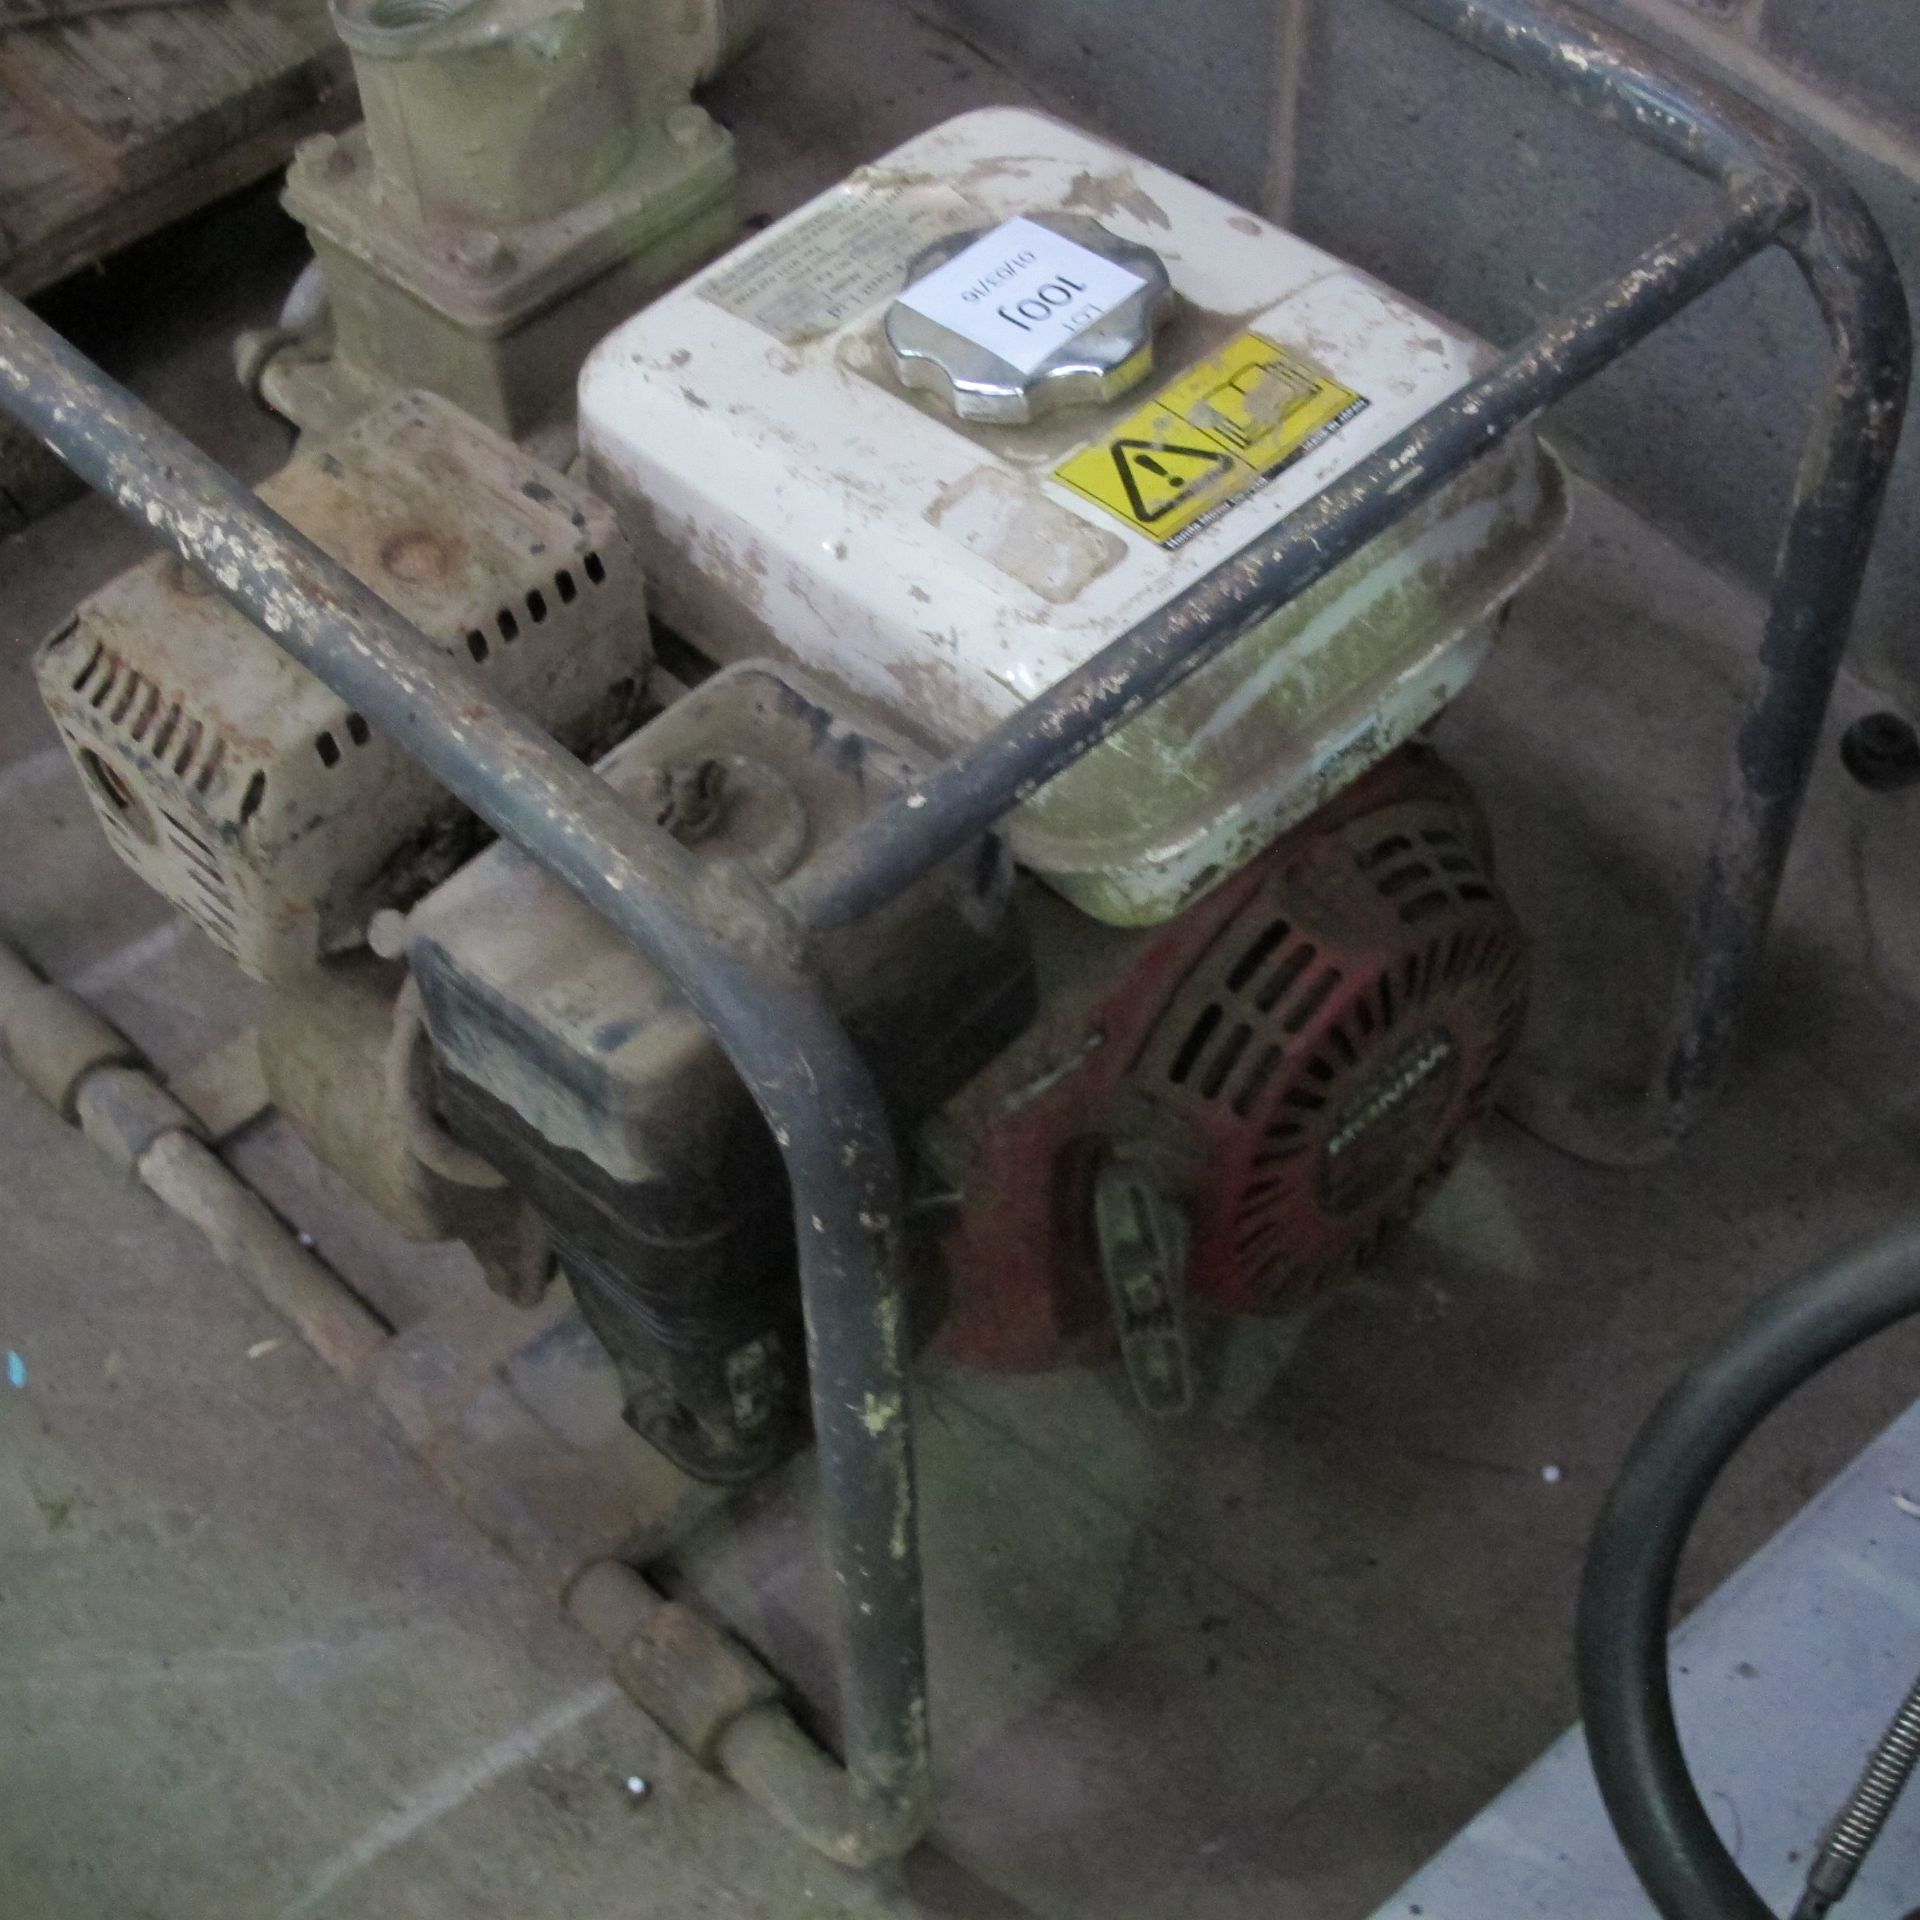 * A Honda-engined cradle mounted water pump